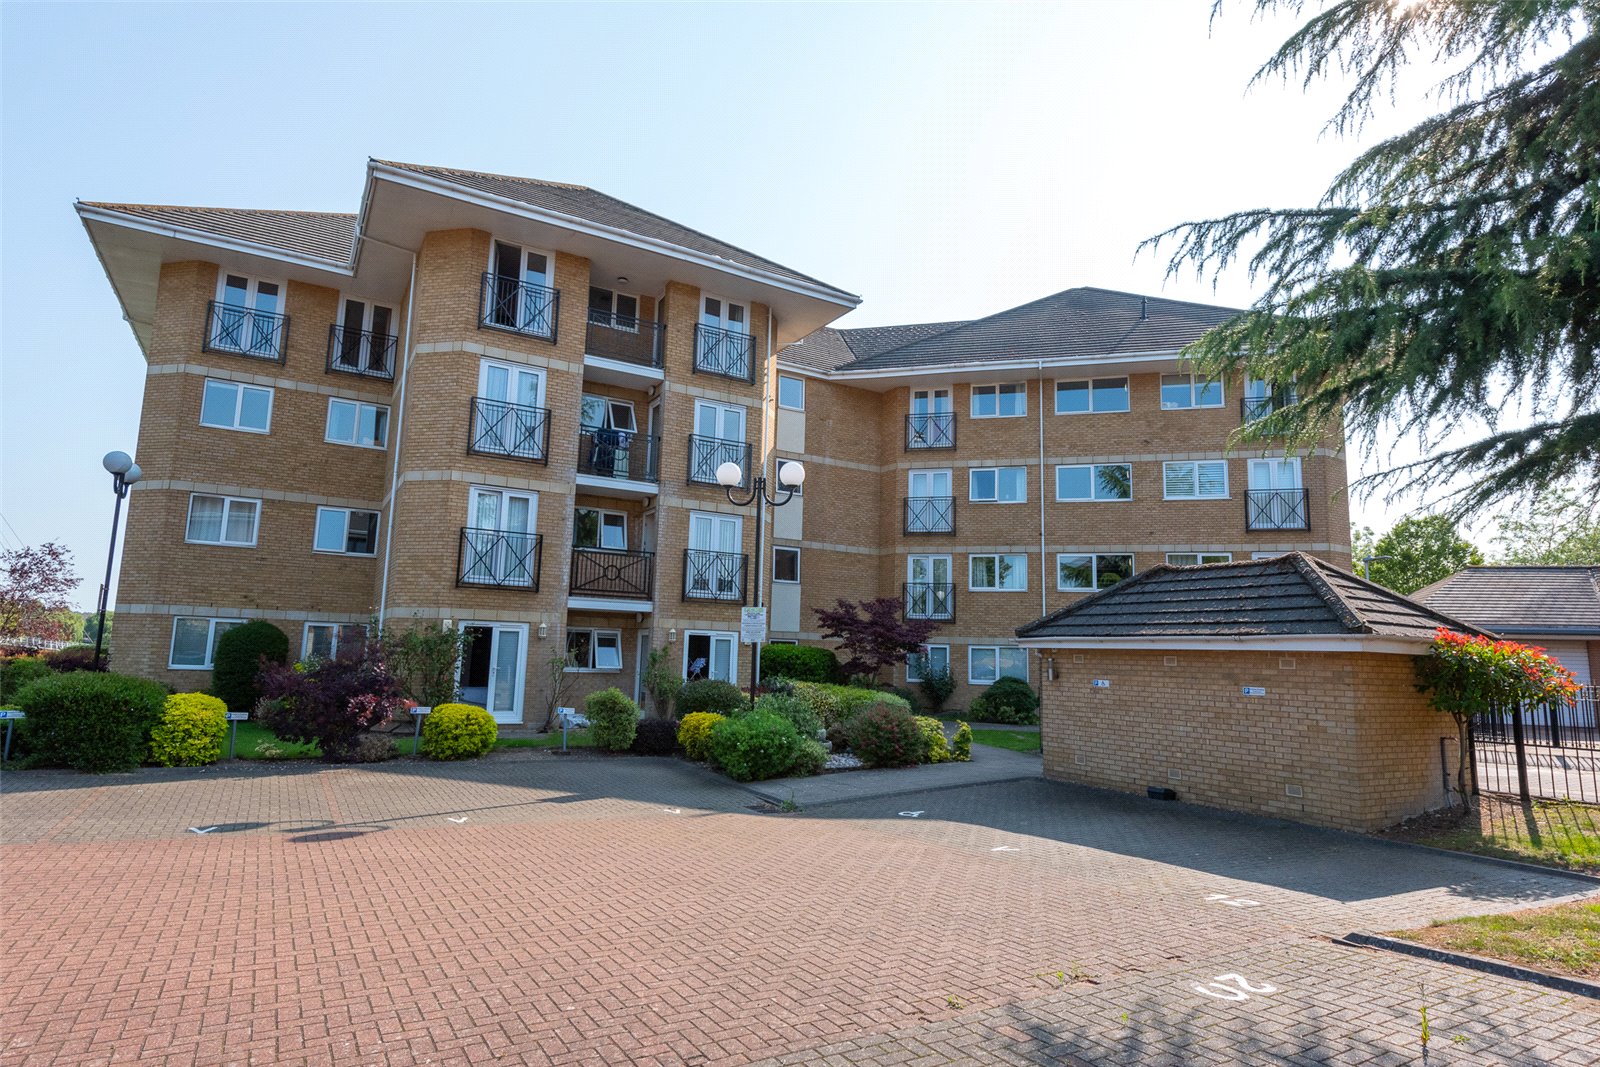 Thames Court, Norman Place, Reading, Berkshire, RG1